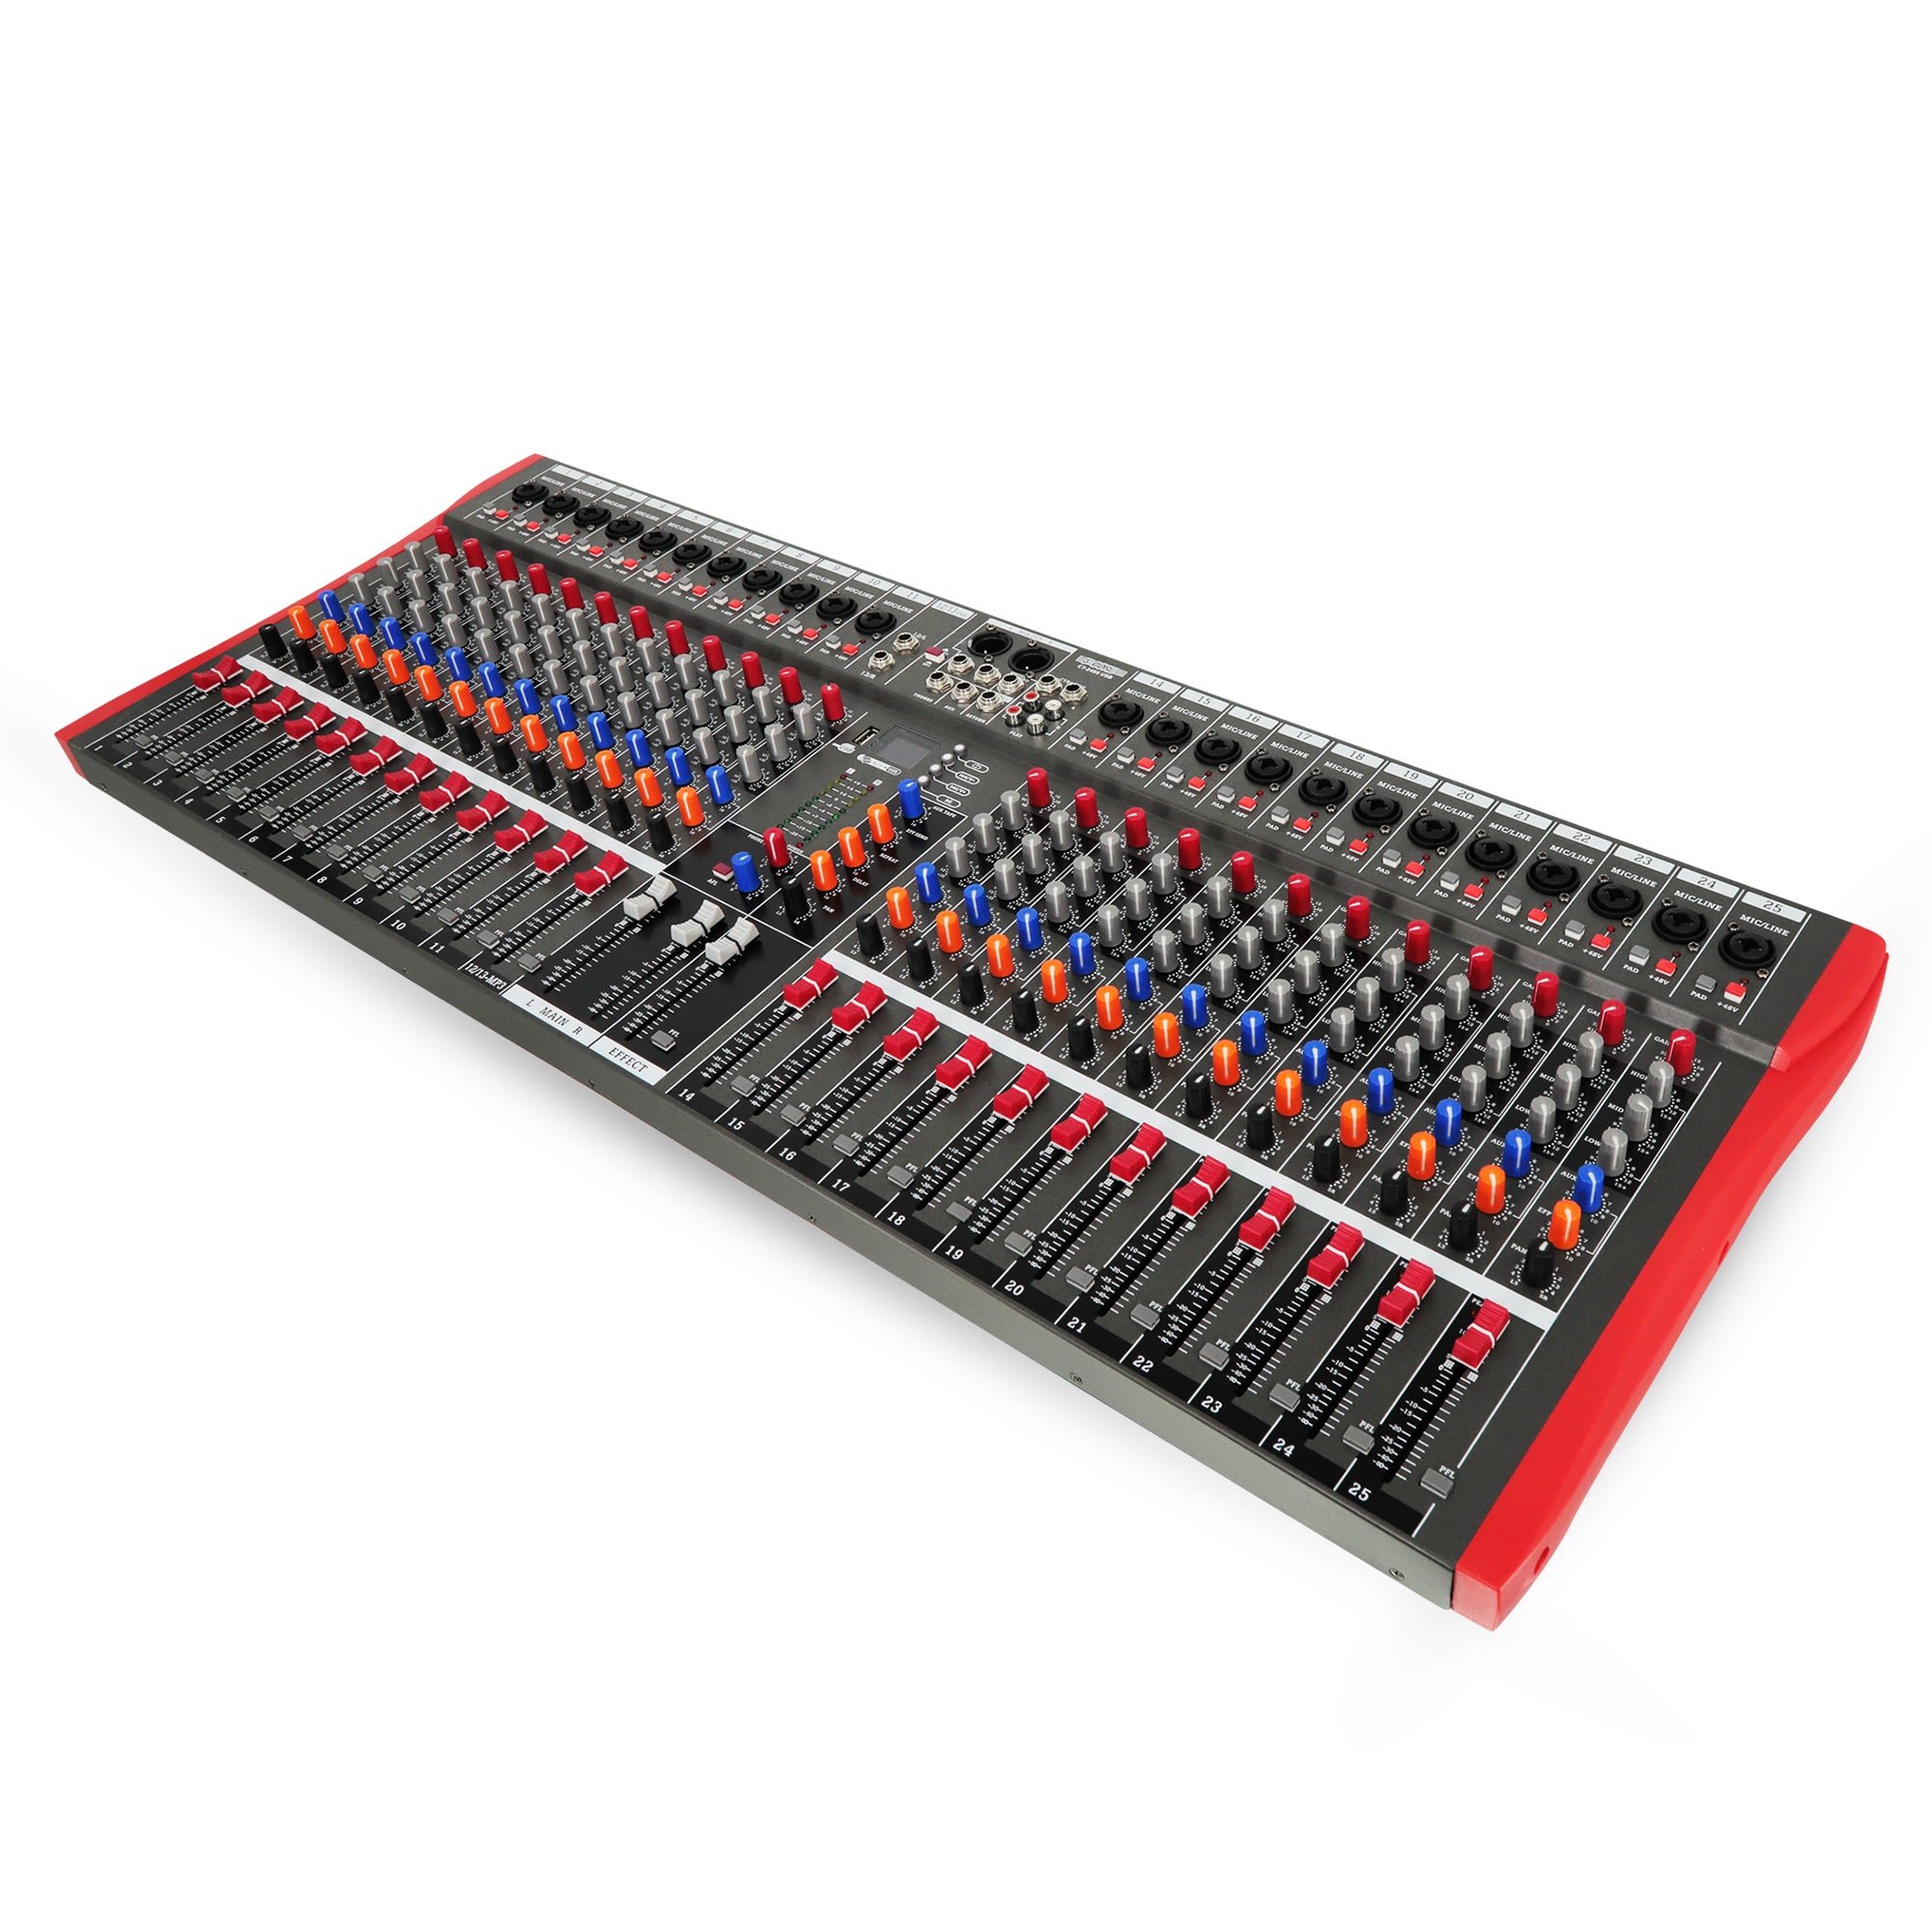 24-channel audio mixer designed for professional sound control and mixing.